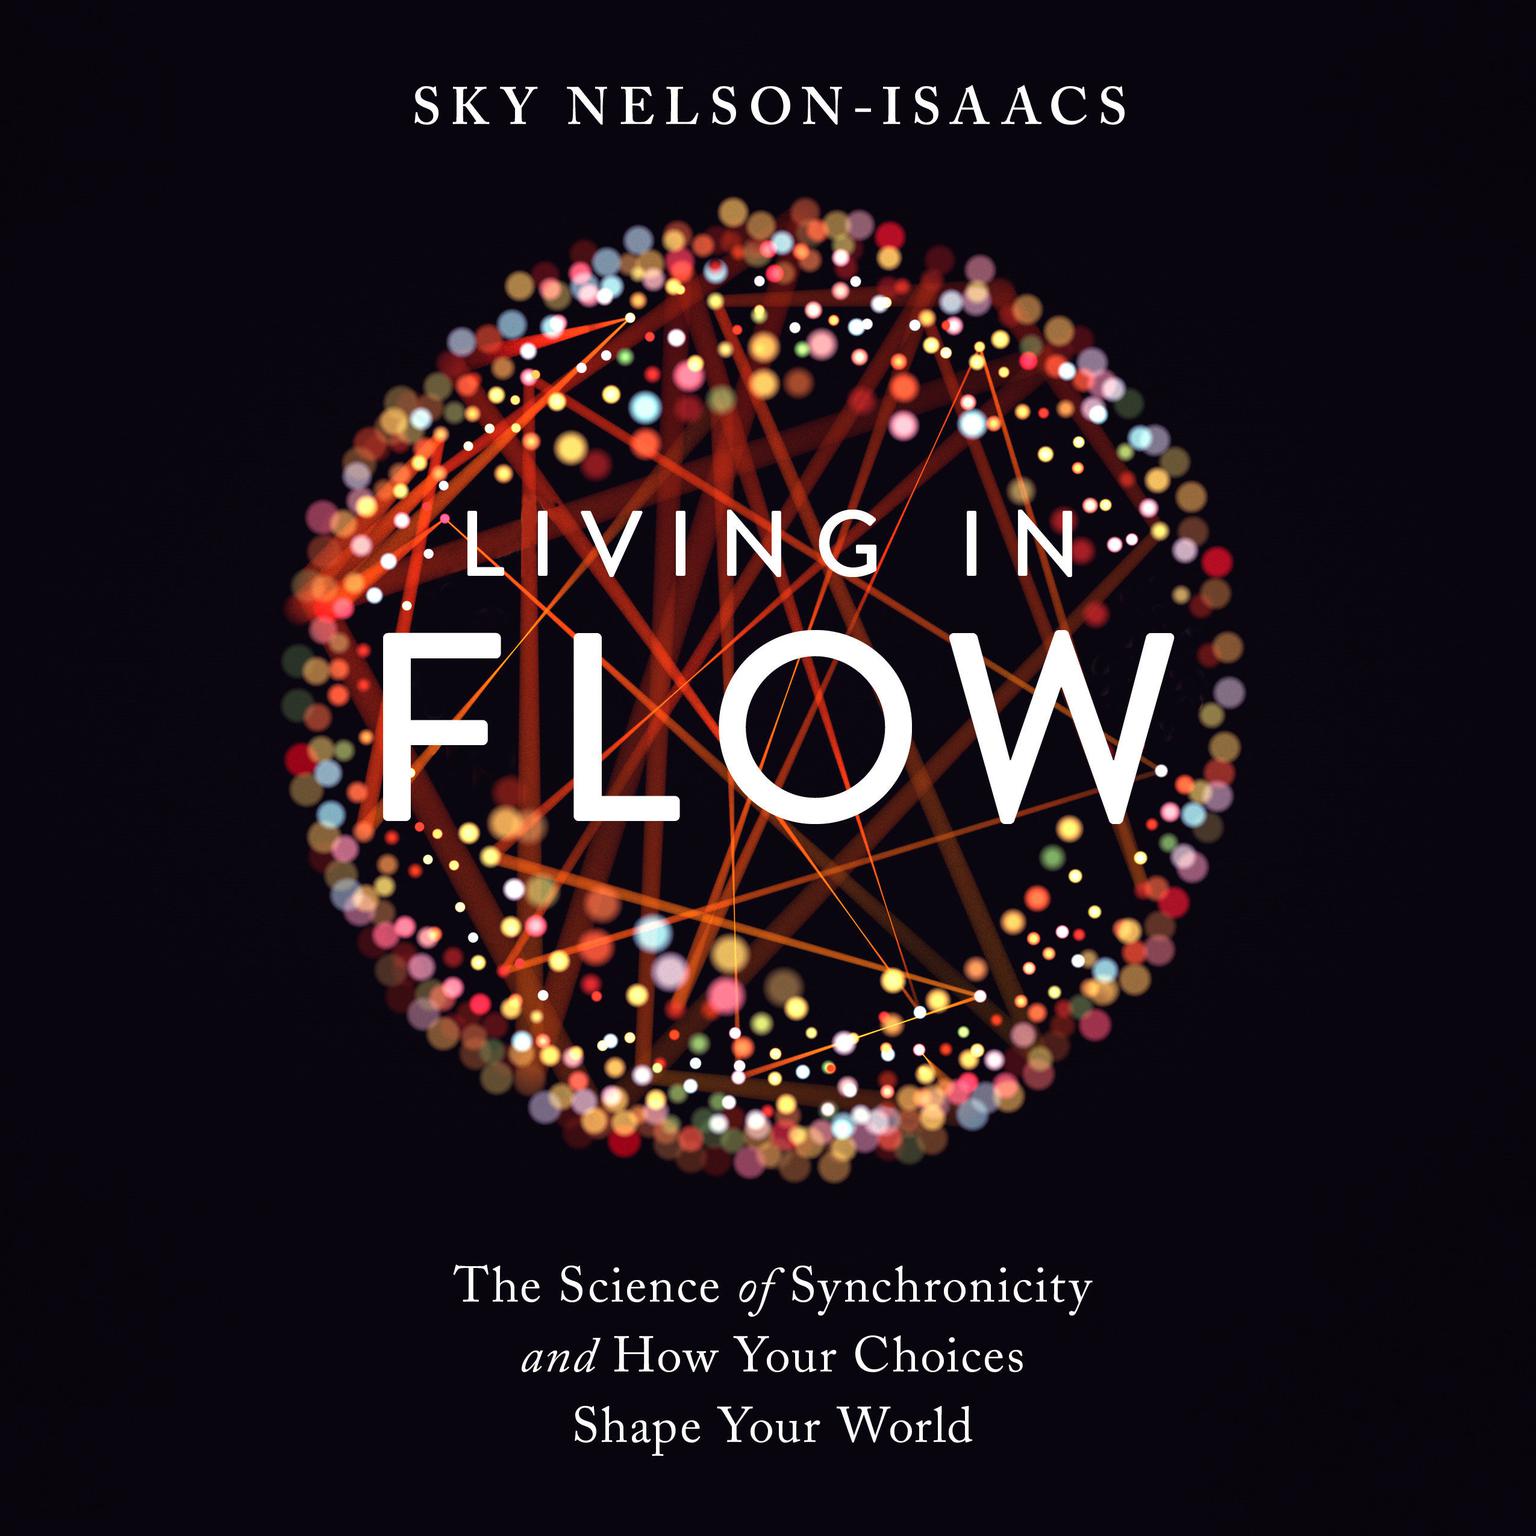 Living in Flow: The Science of Synchronicity and How Your Choices Shape Your World Audiobook, by Sky Nelson-Isaacs